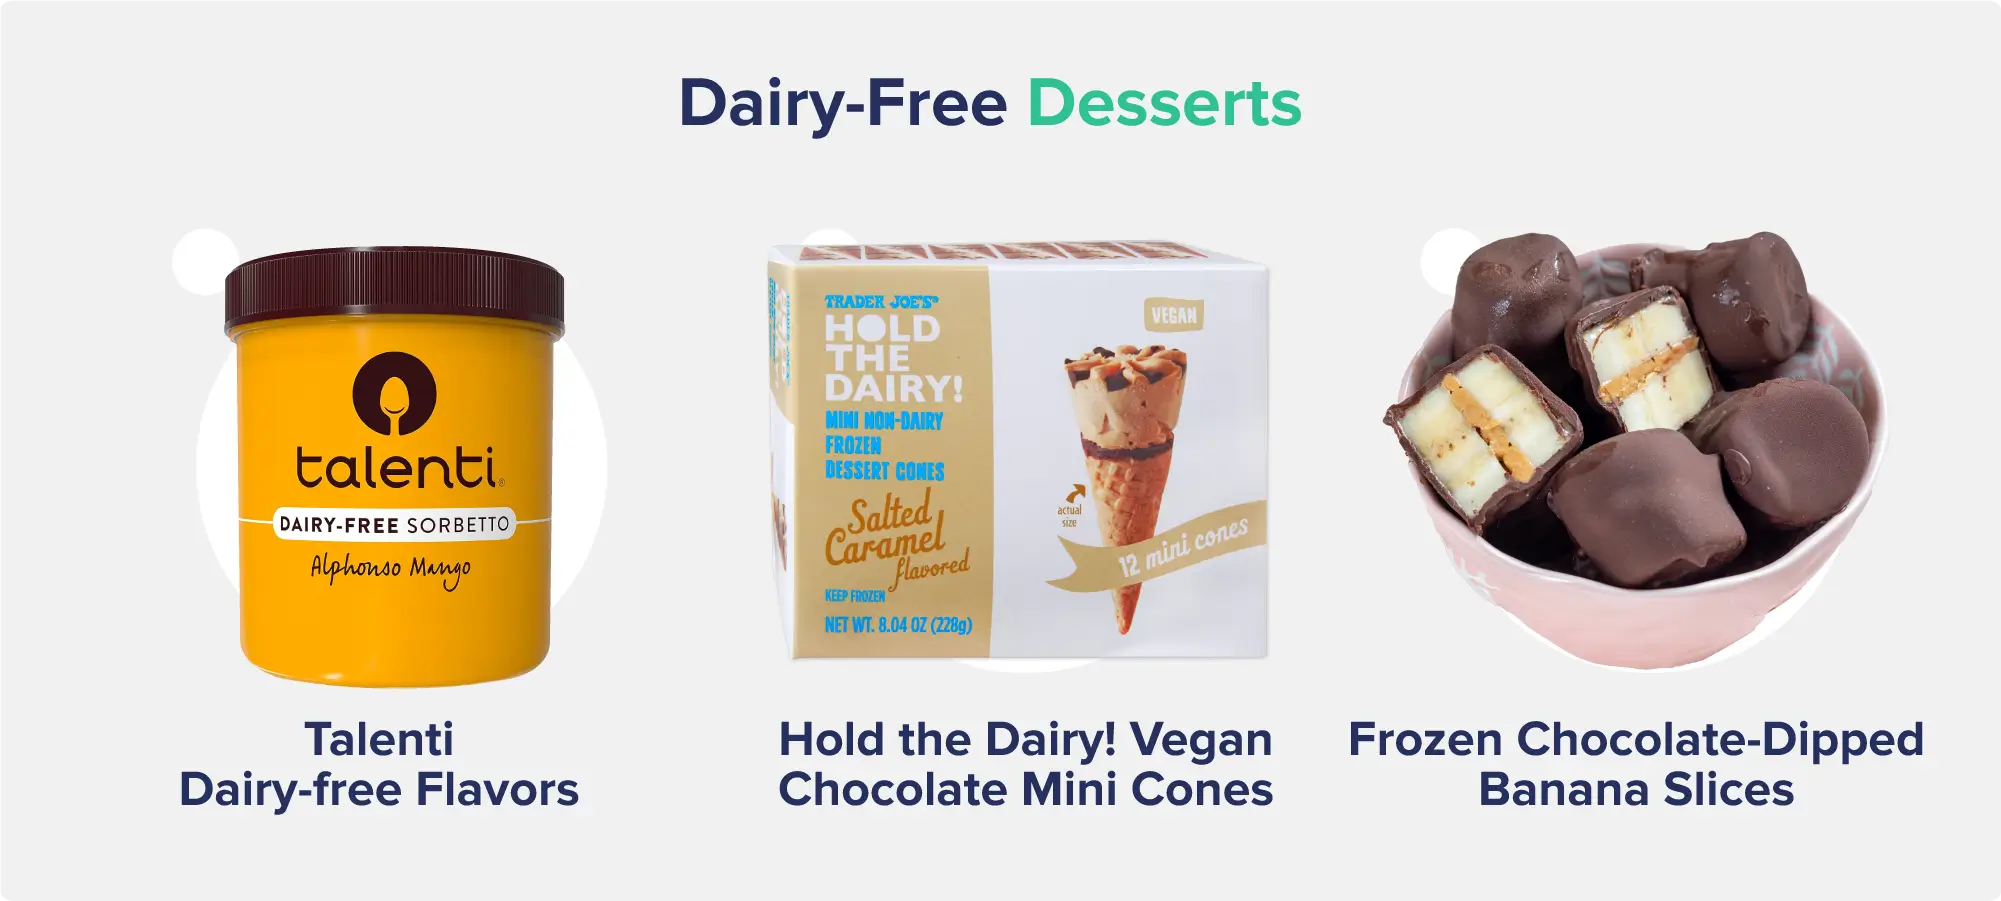 A graphic entitled "Dairy-Free Desserts" depicting labeled images of a tub of Talenti Dairy-Free Sorbetto, a box of Hold the Dairy! Vegan Chocolate Mini Cones, and a bowl of Frozen Chocolate-Dipped Banana Slices.